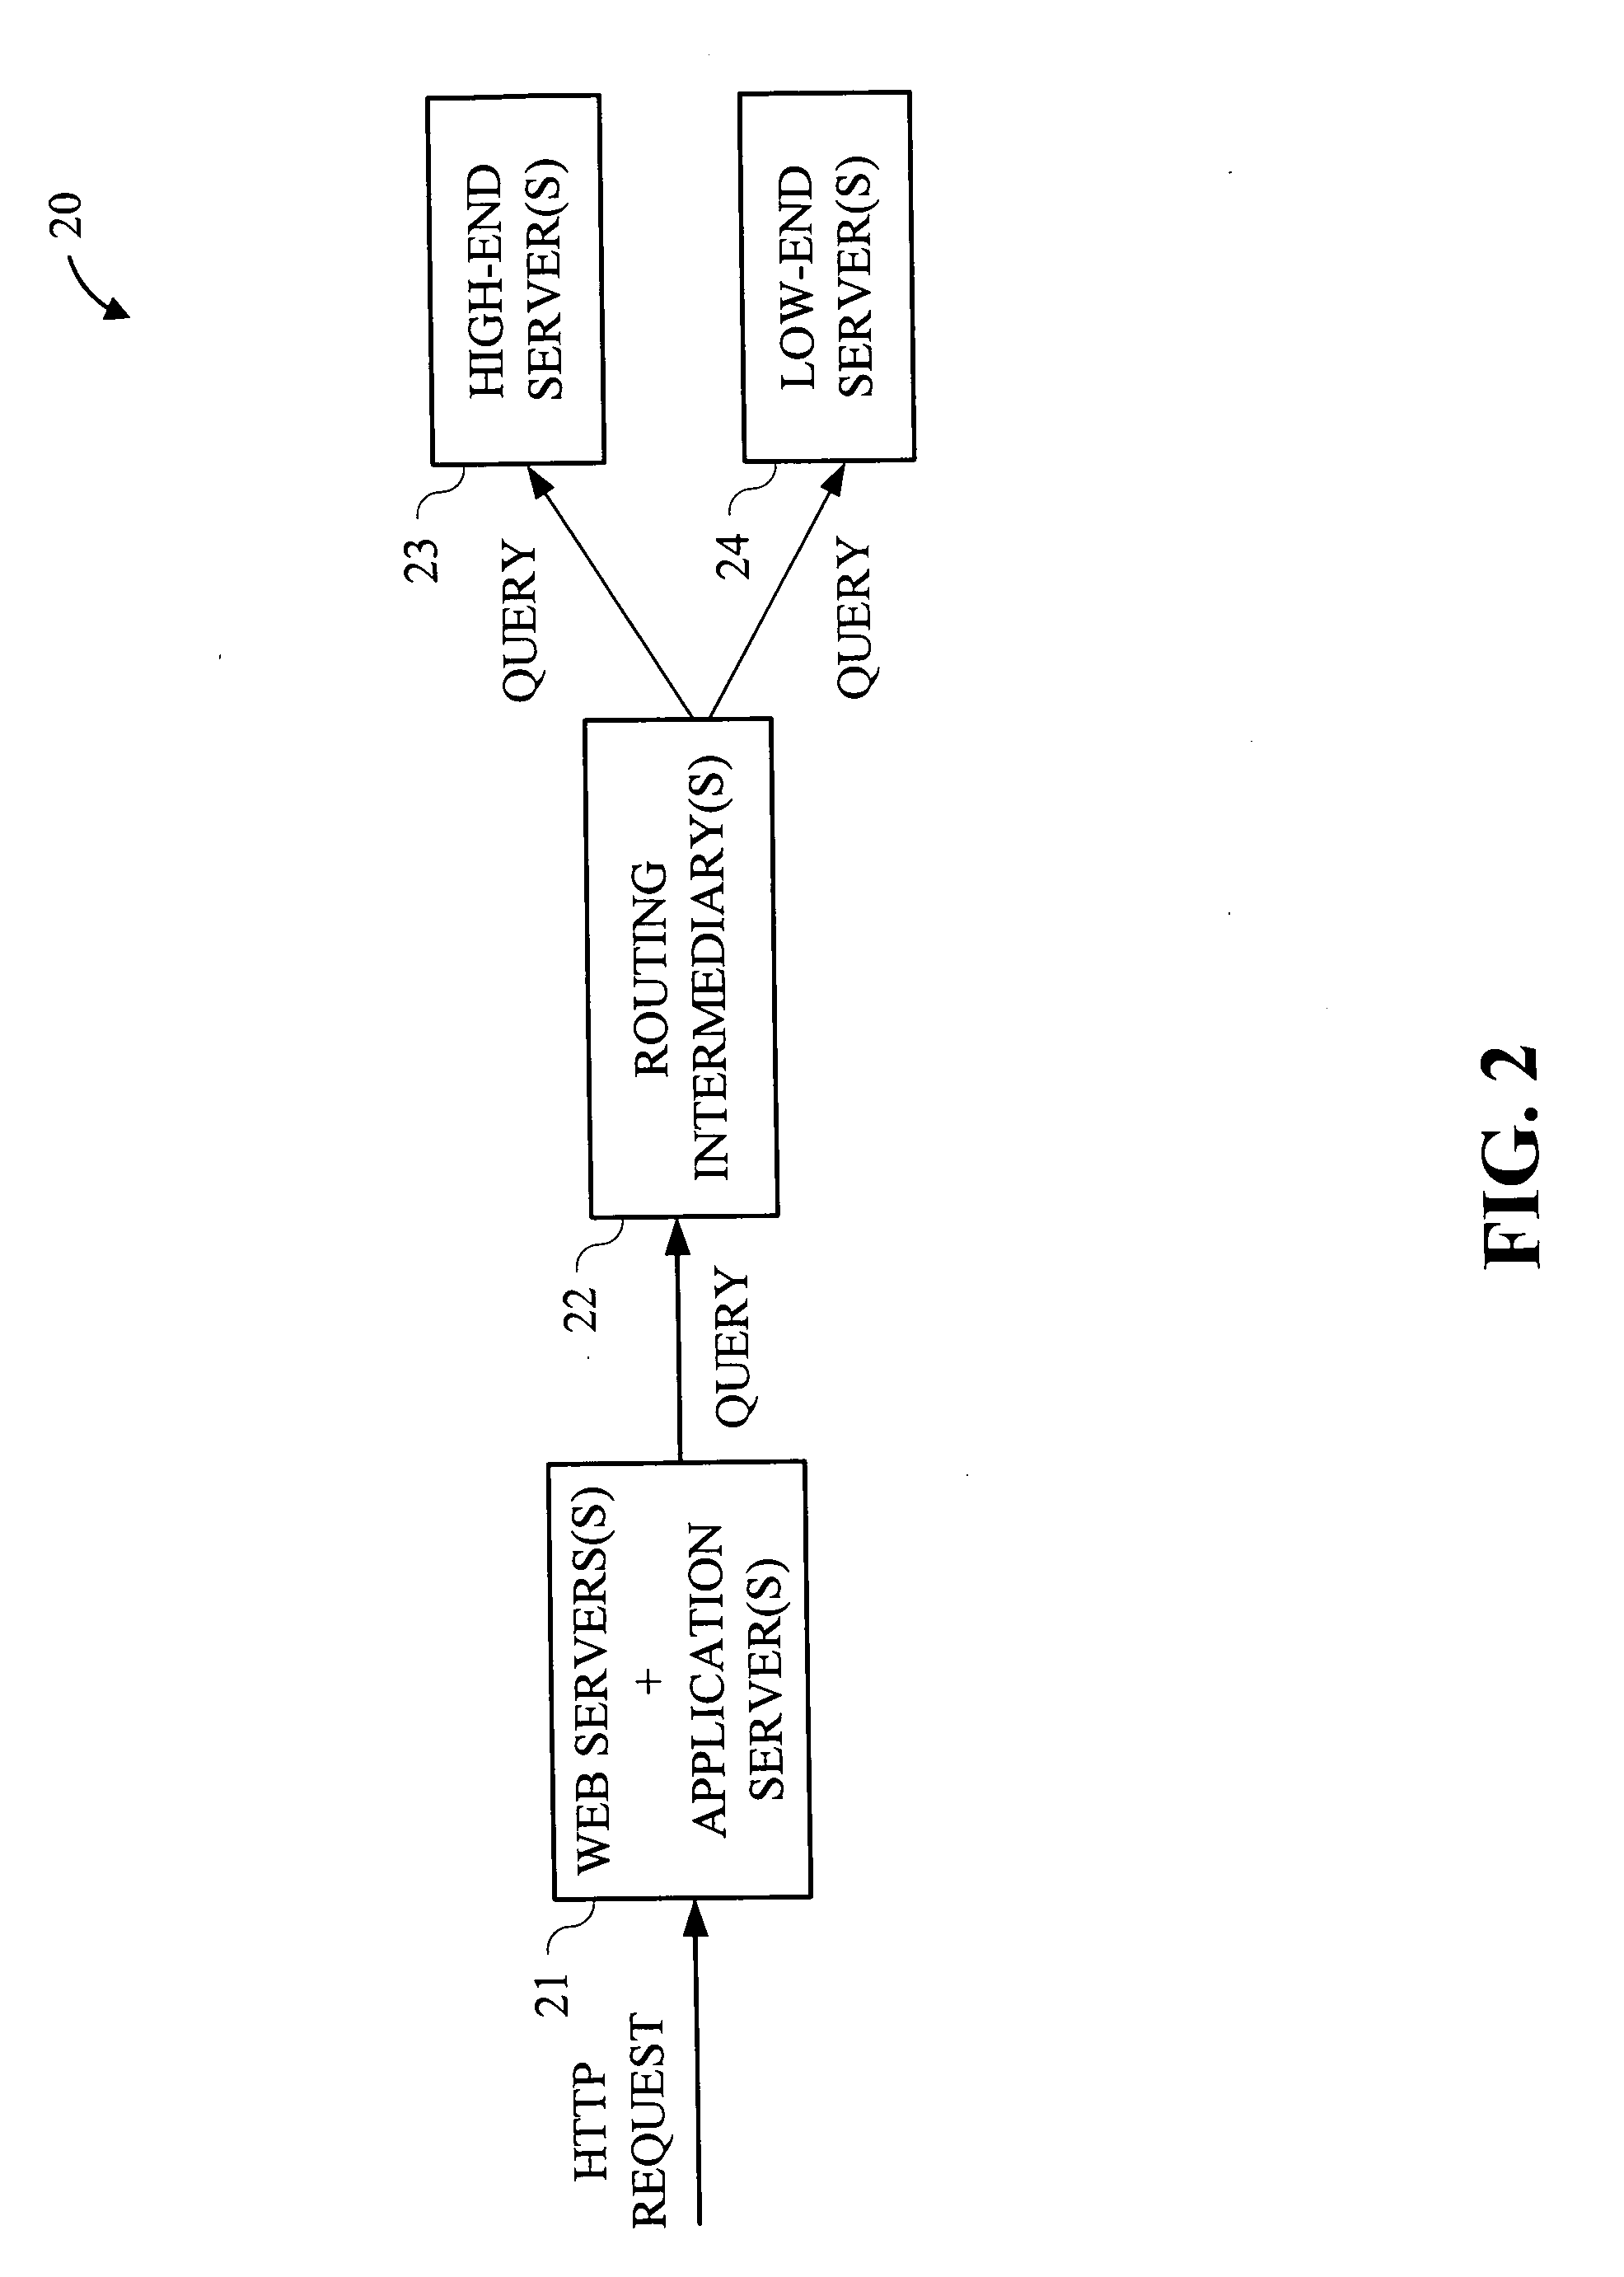 Methods and sytems for dynamically reconfigurable load balancing